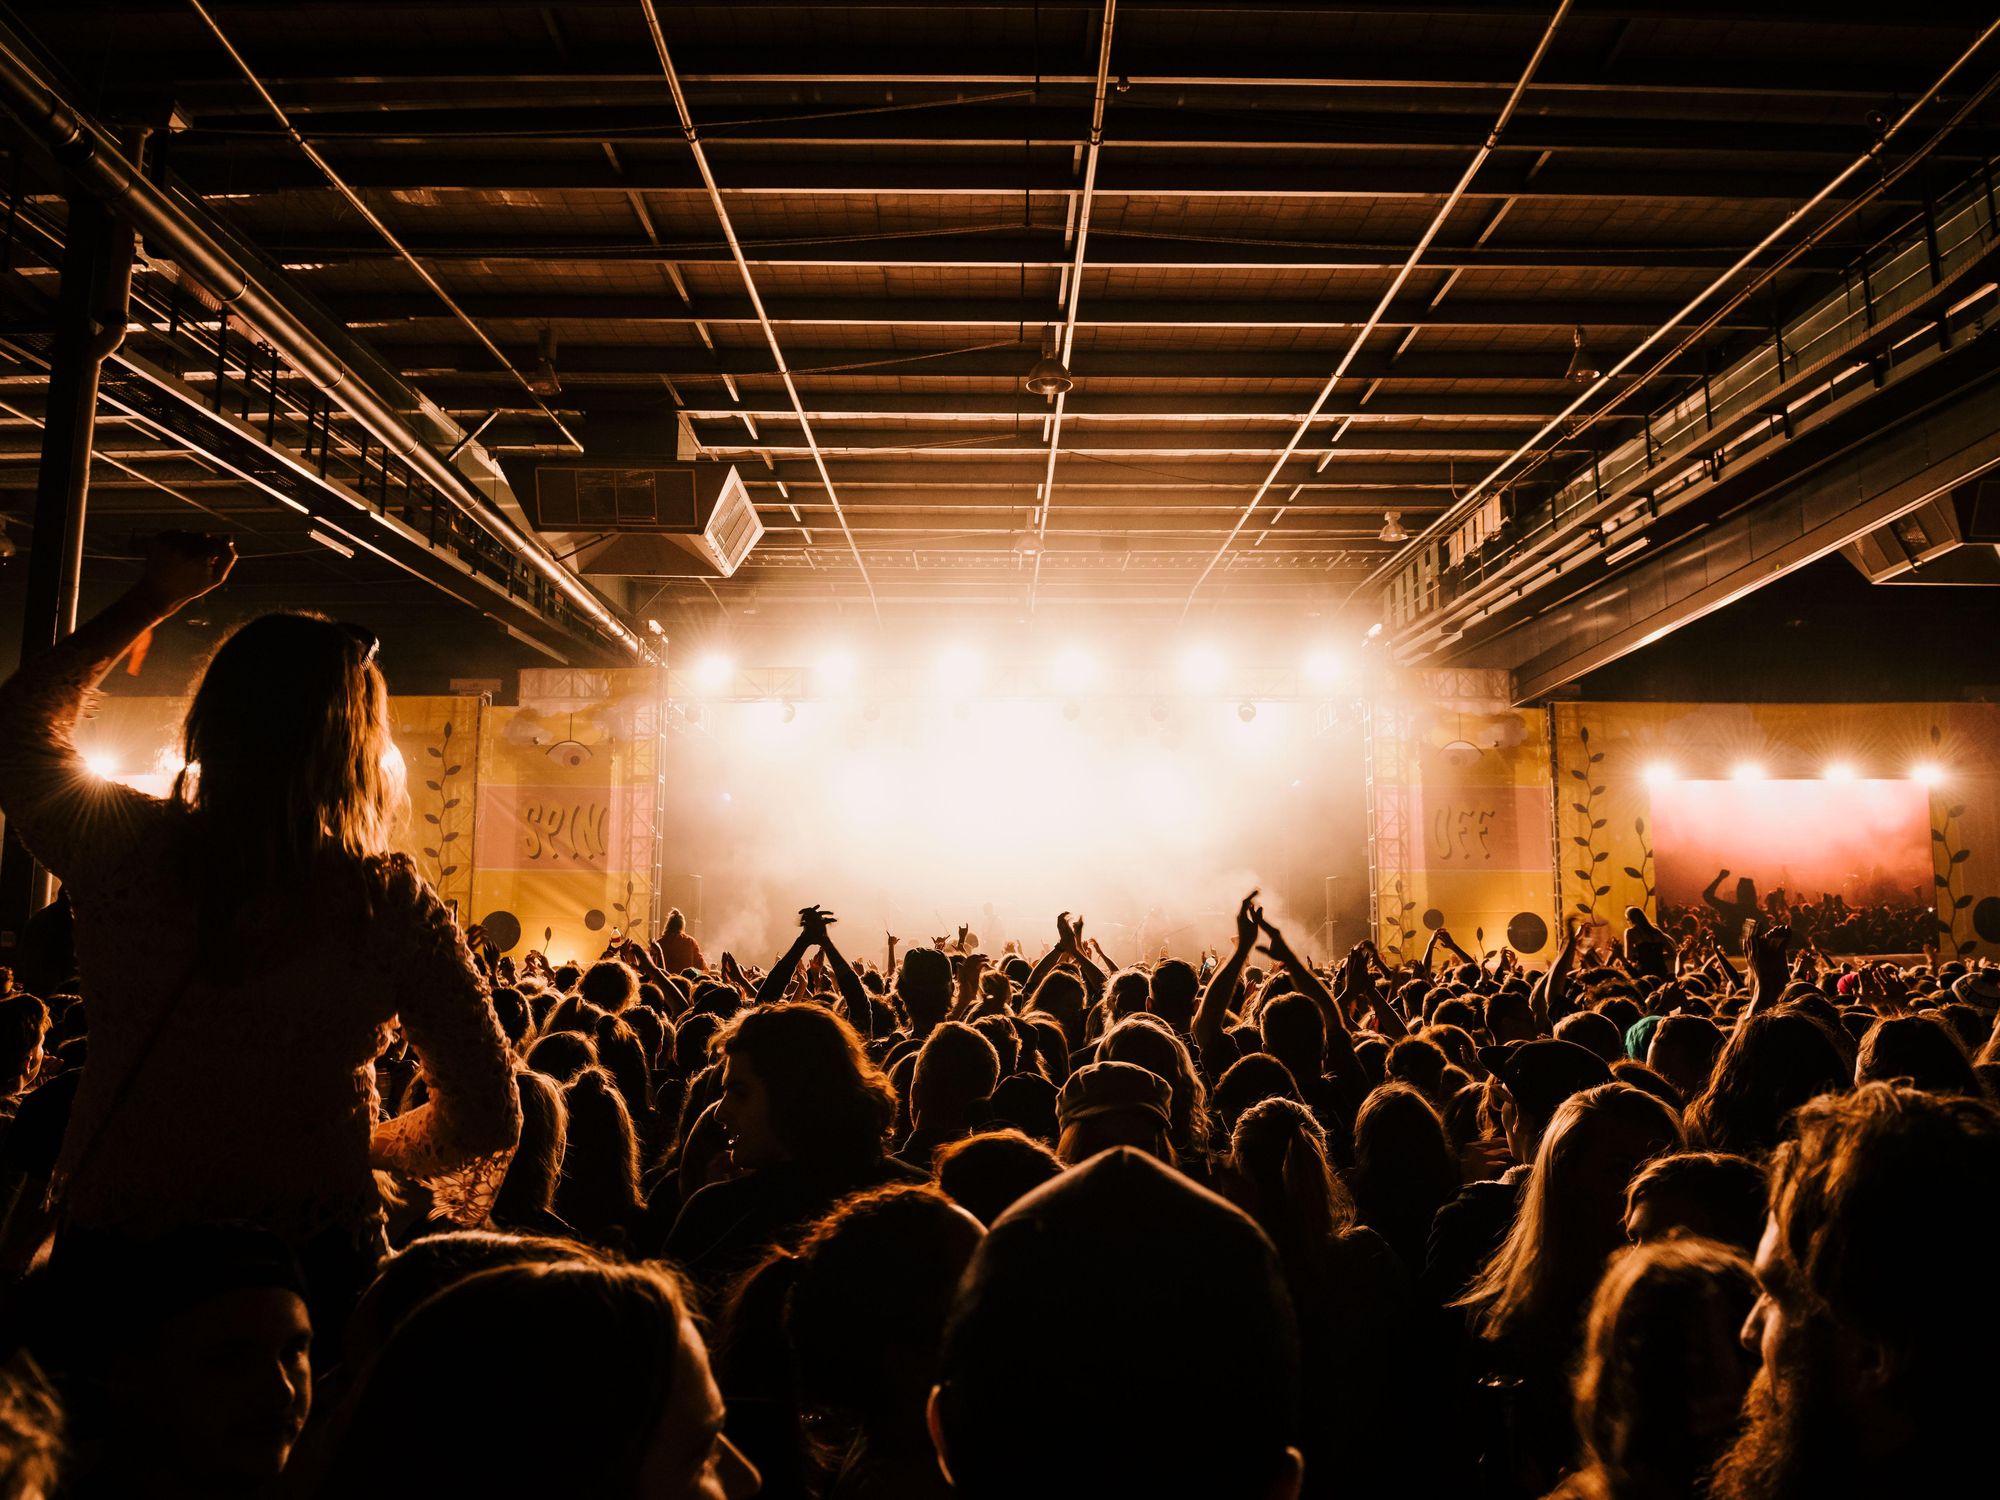 SaveLive Raises $135 Million to Buy Small Music Venues Hurt by the Pandemic